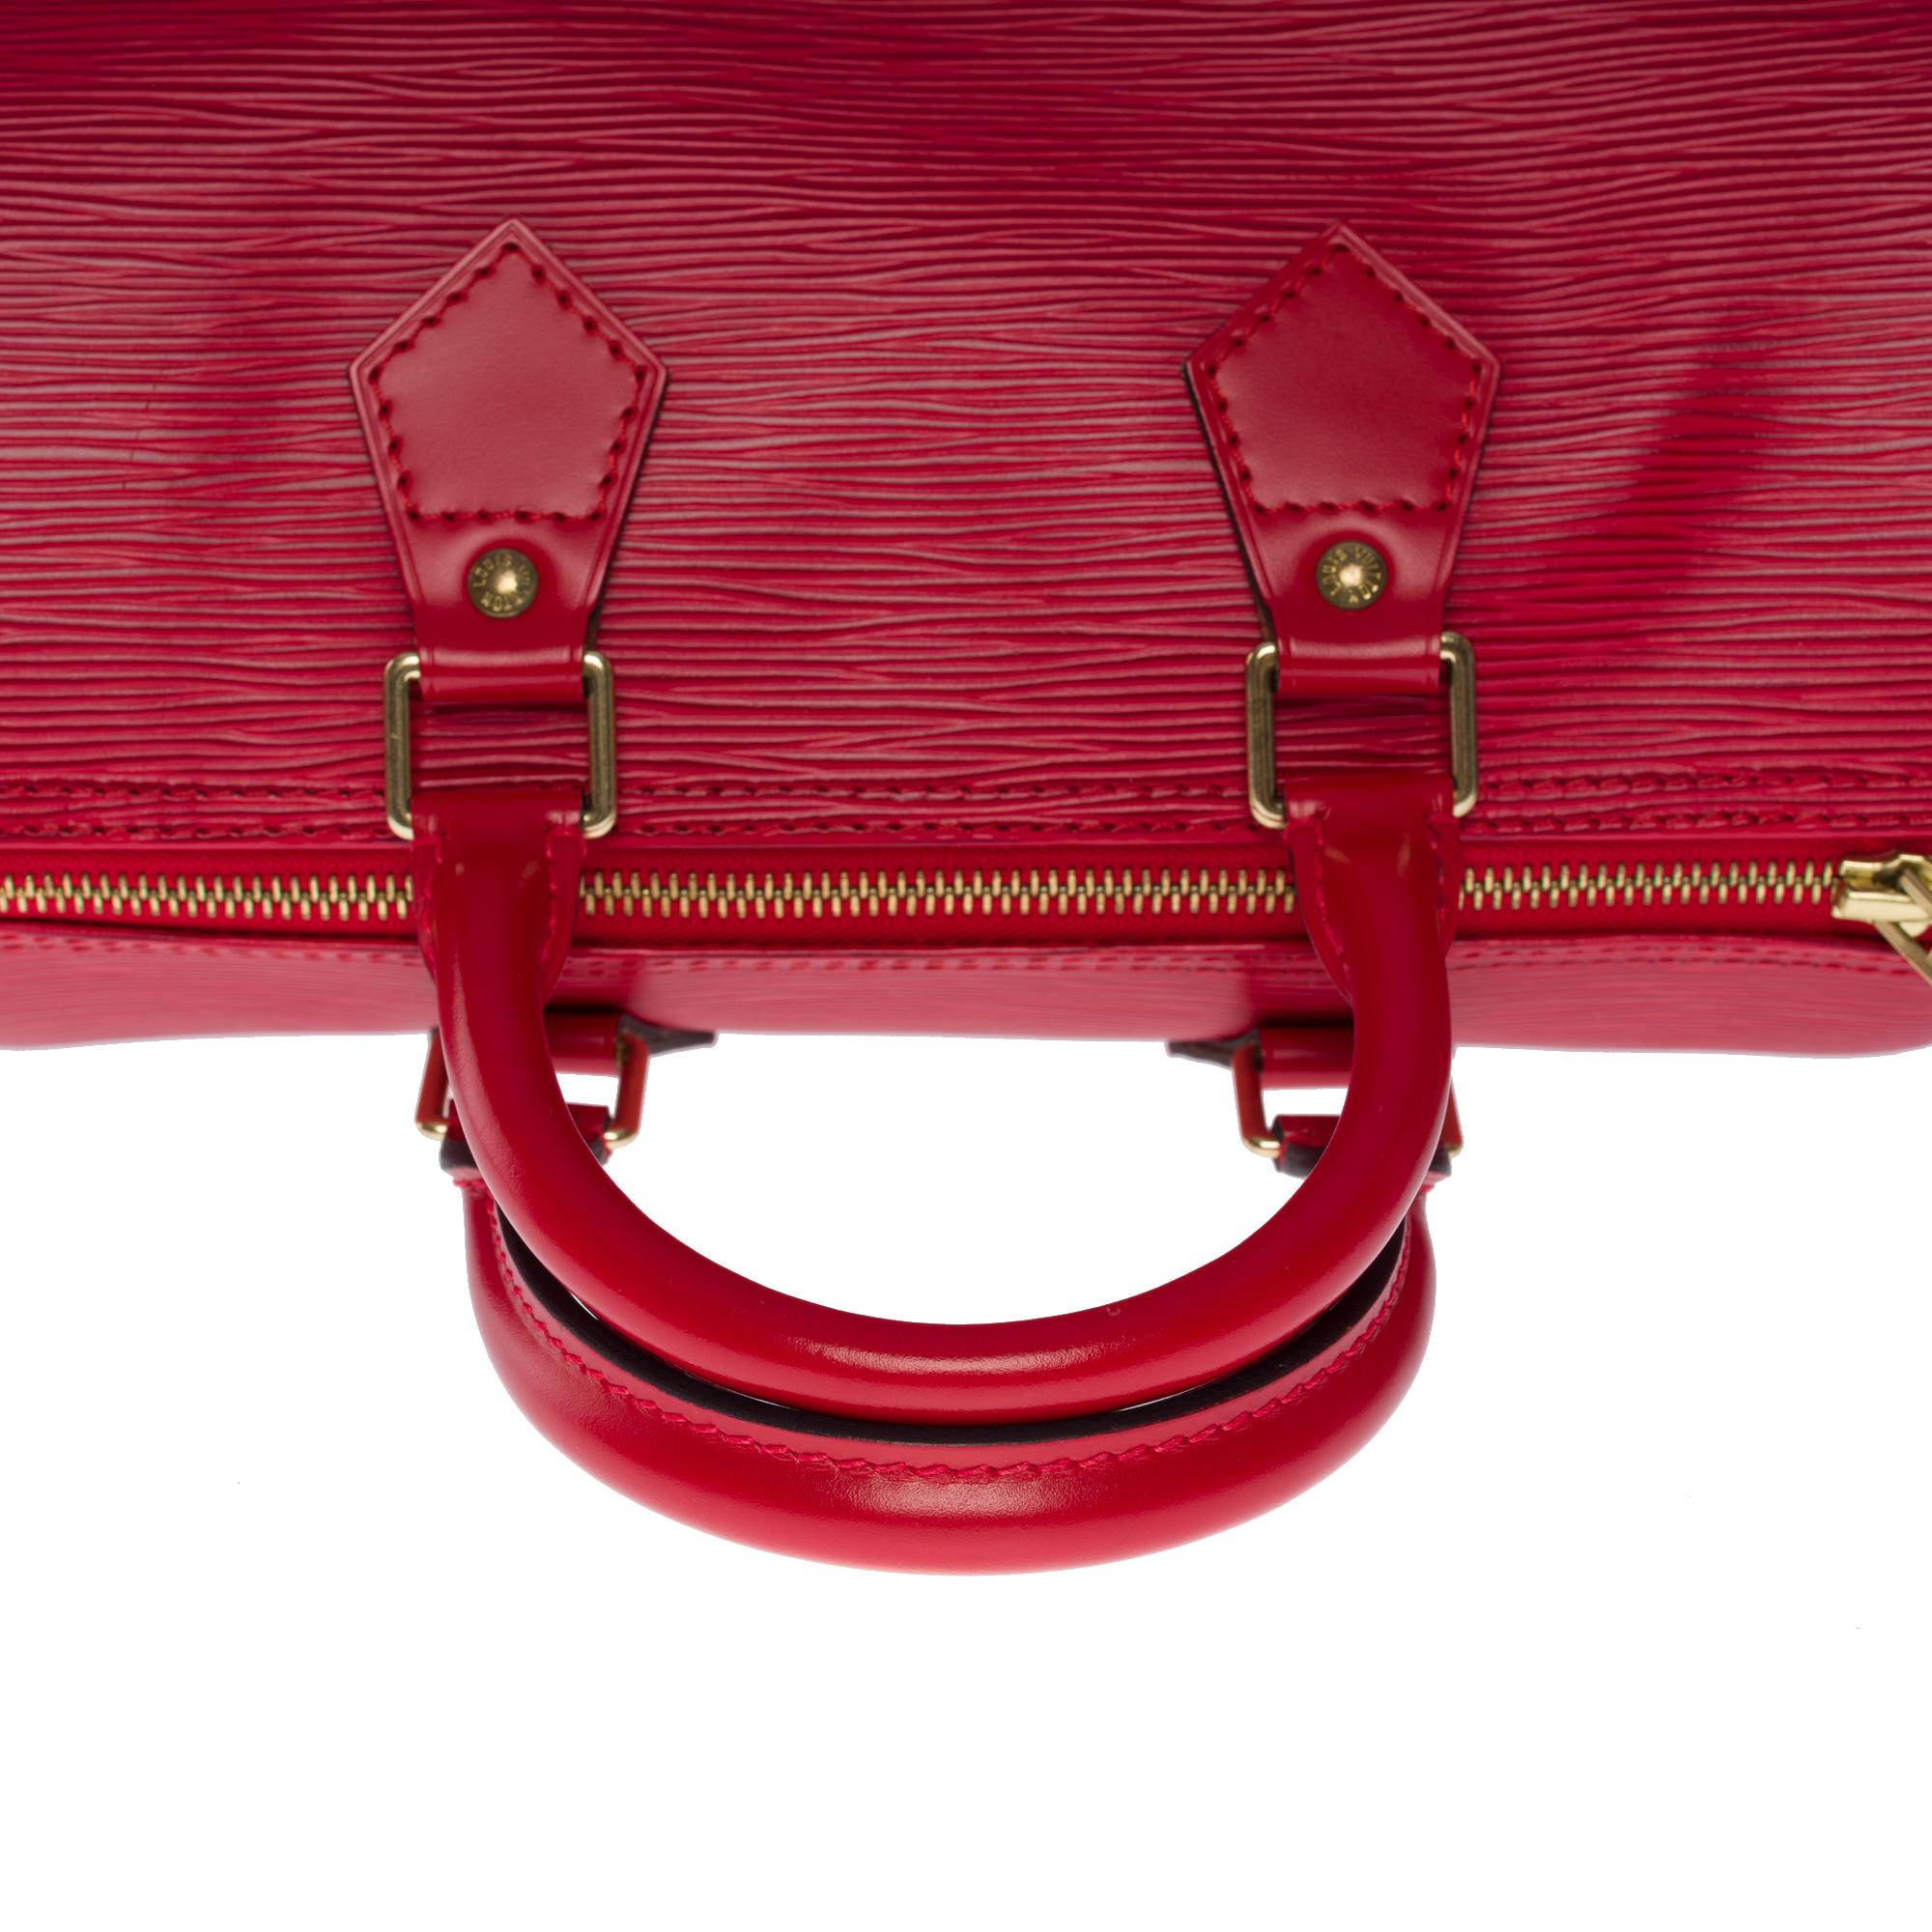 Gorgeous Louis Vuitton Speedy 25 handbag in red epi leather and gold hardware 4